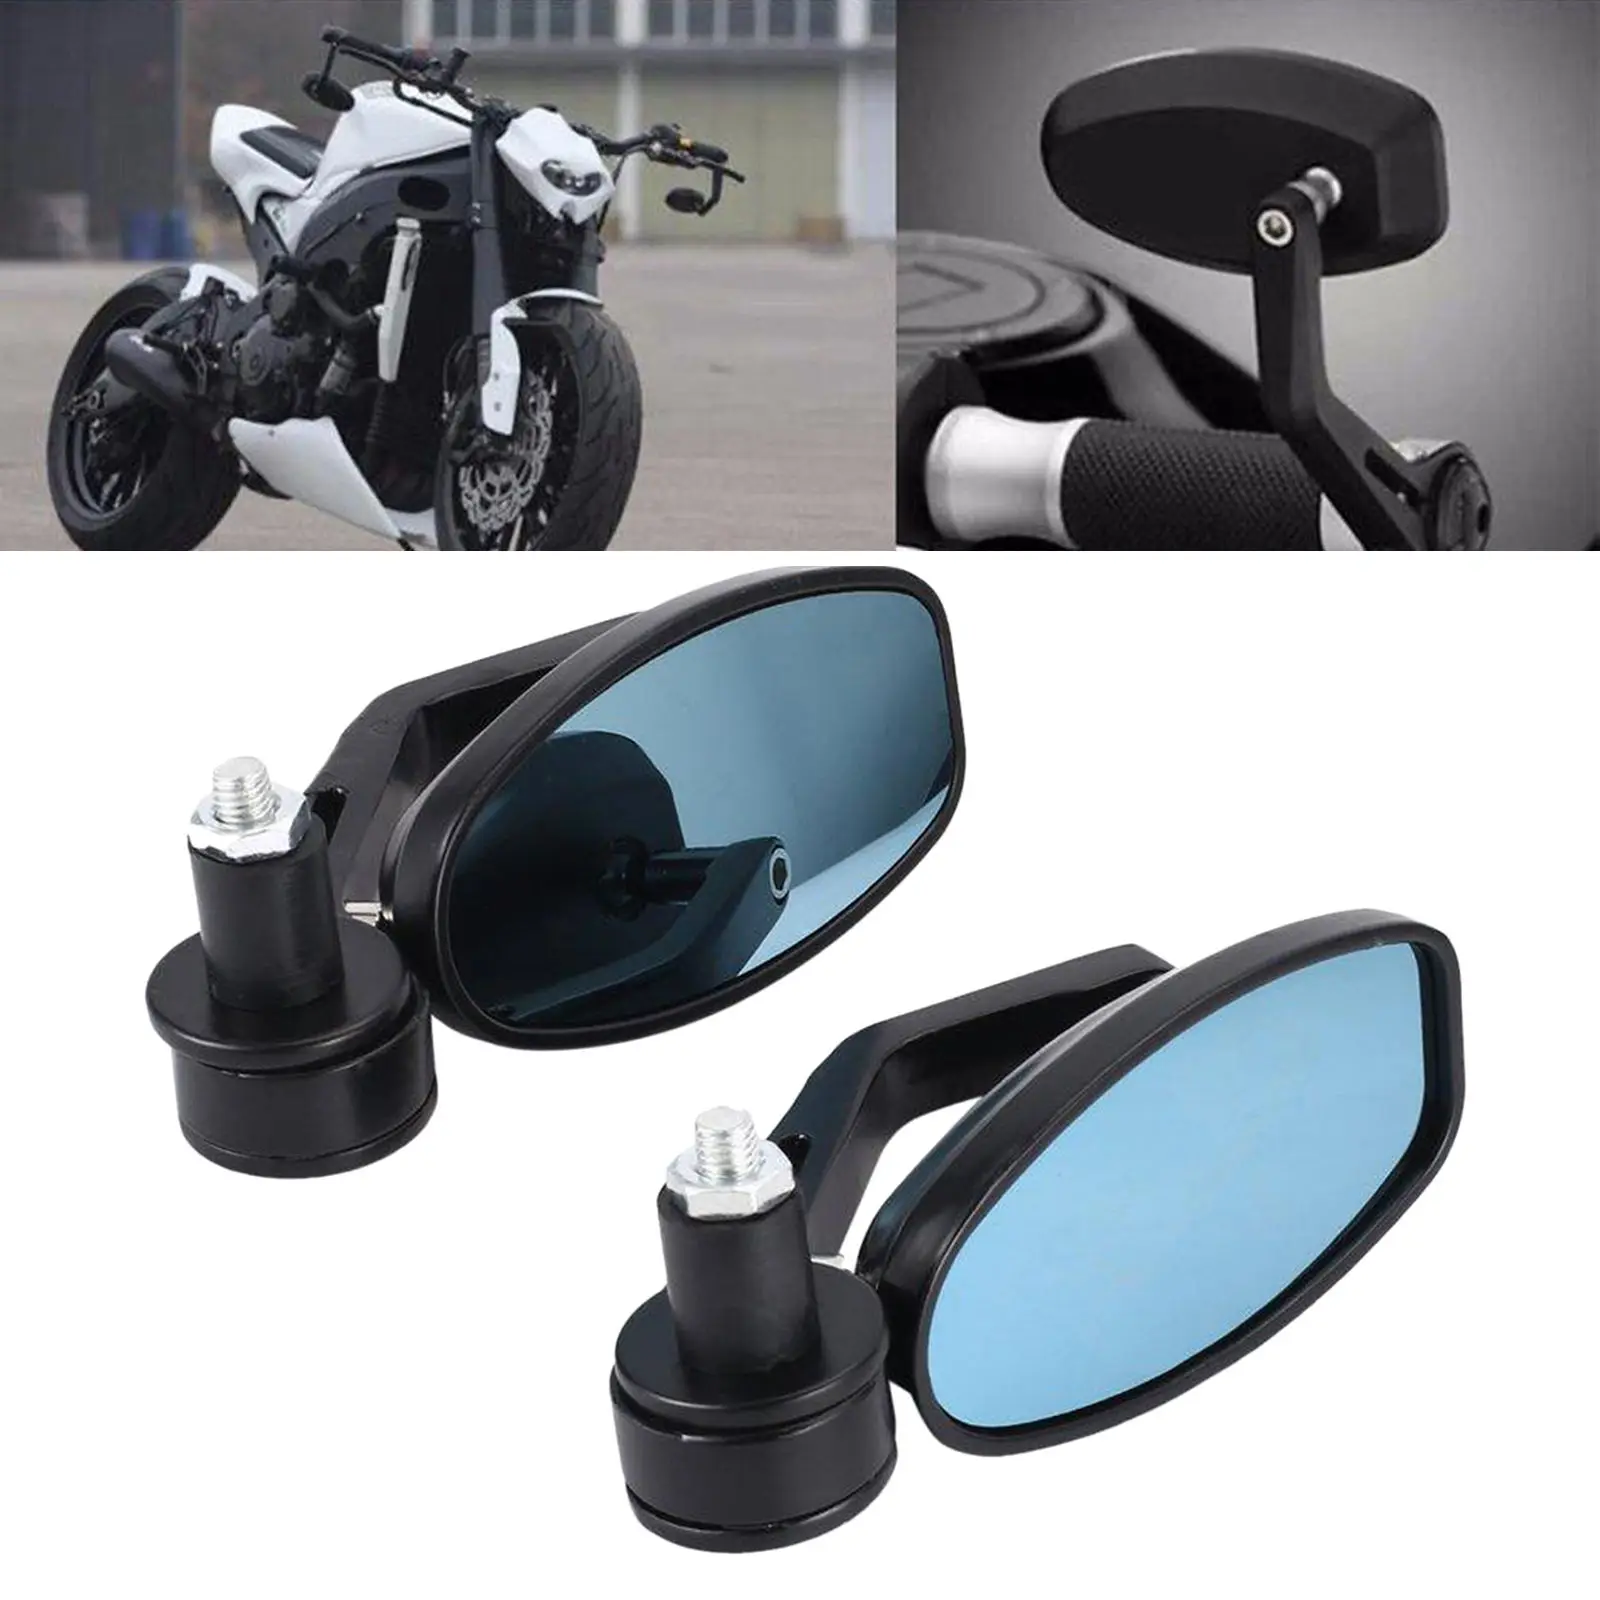 1 Pair Rear View Mirrors Bar End Balck Universal 7/8 Handlebar Side Mirrors Fits Most for Motorbike